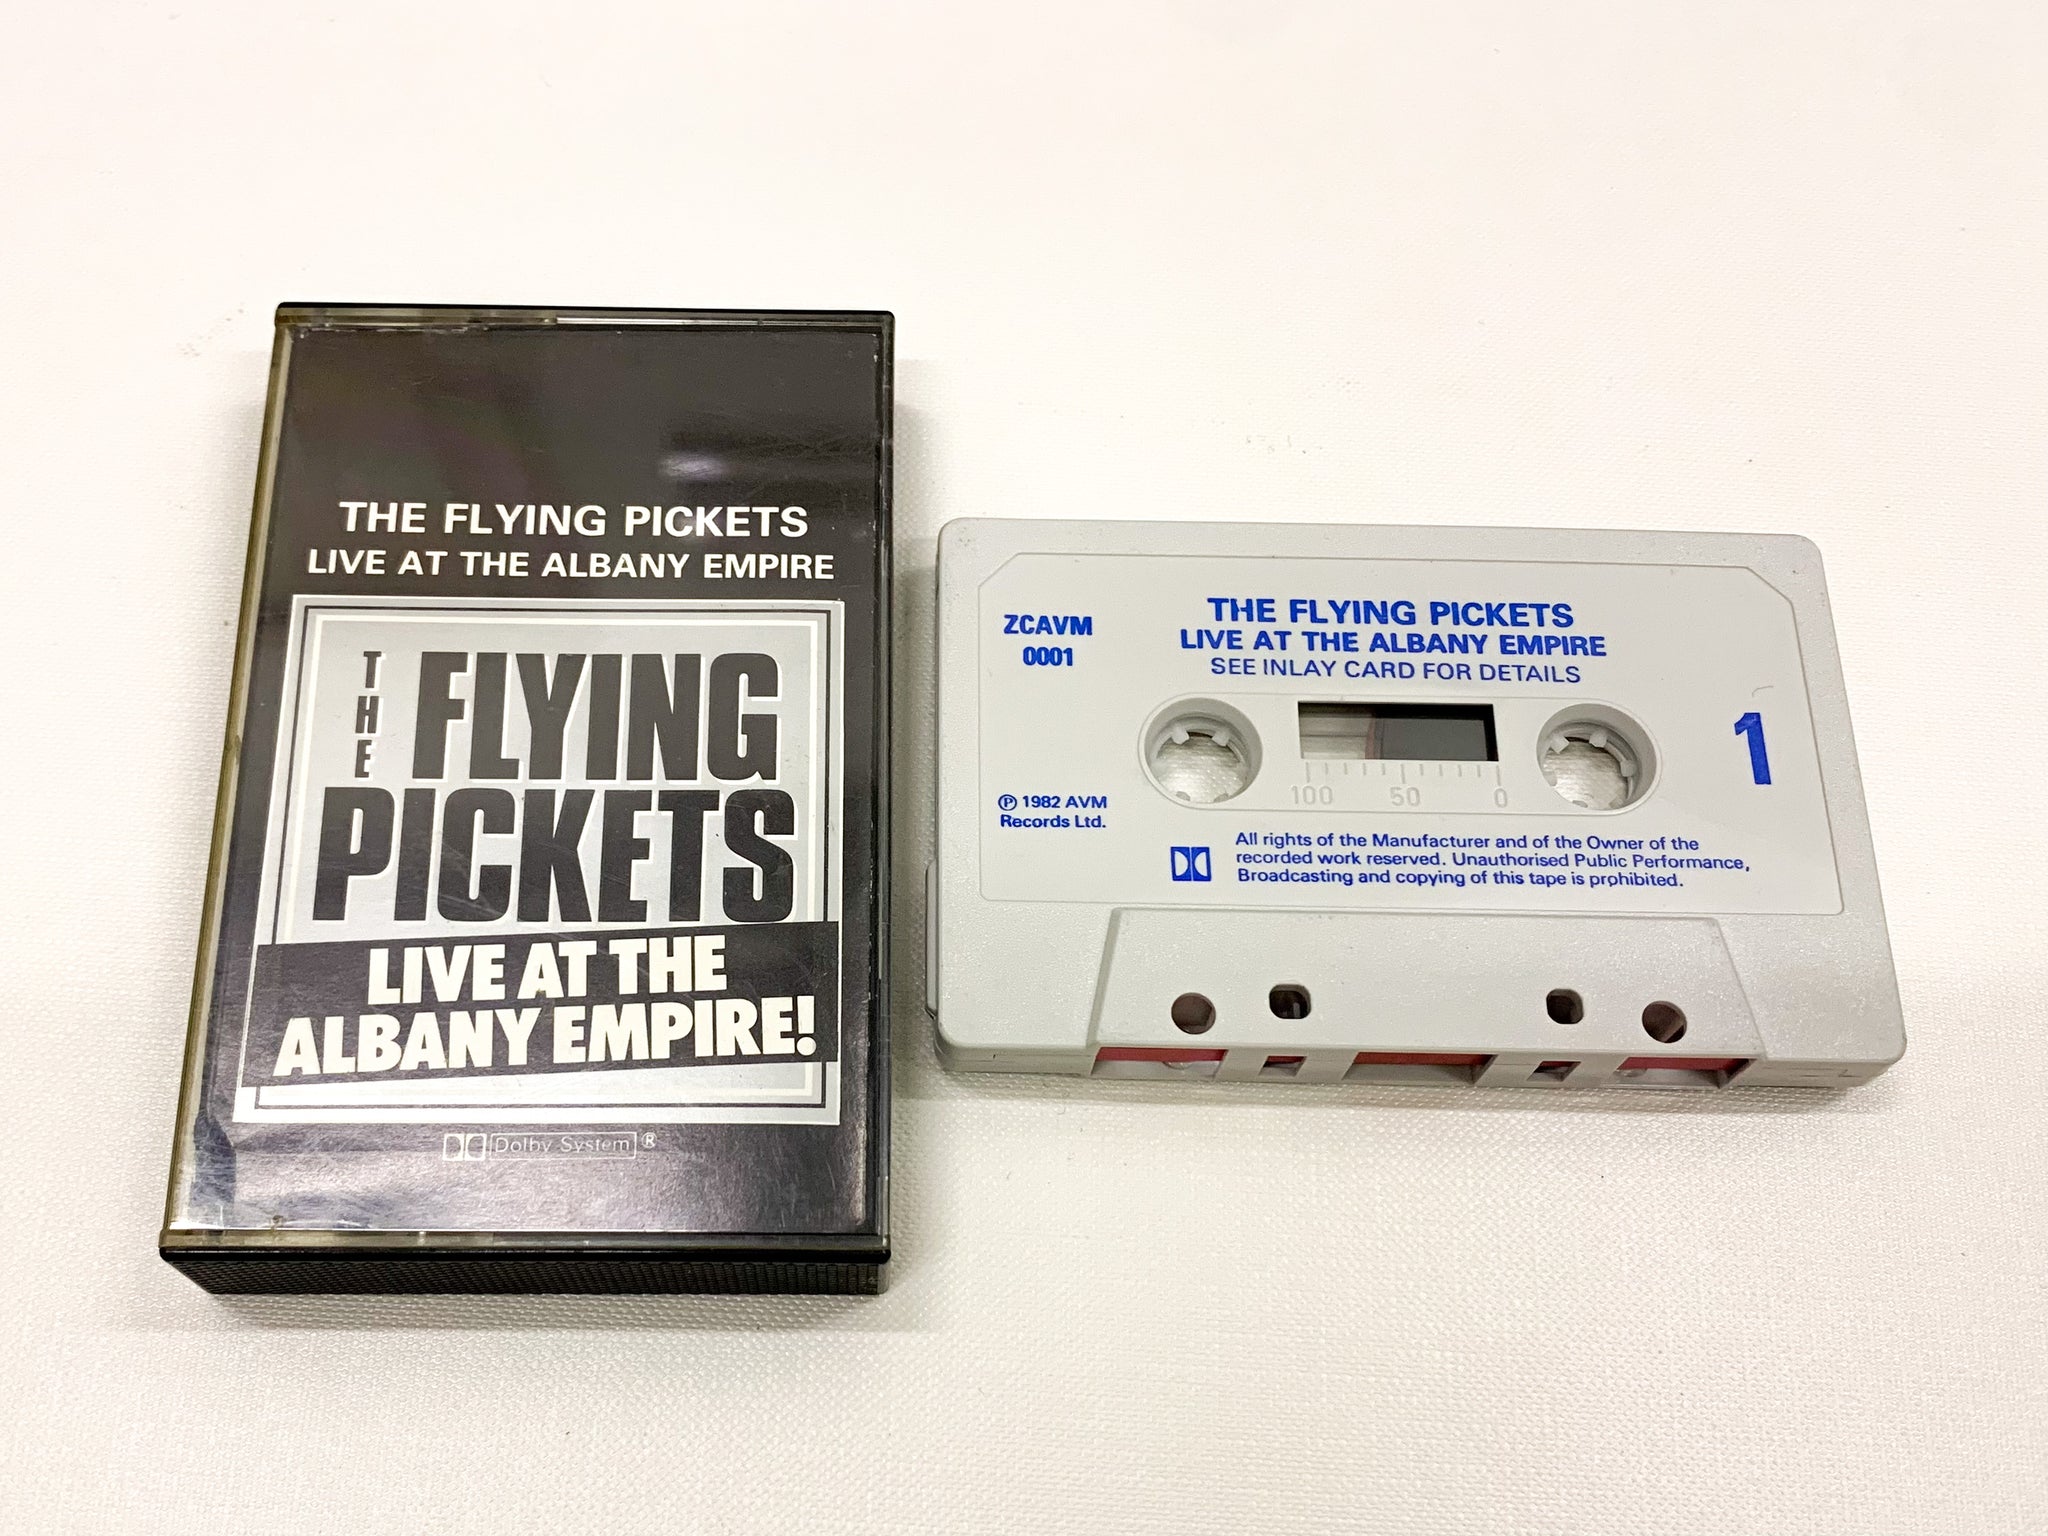 The Flying Pickets - Live At The Albany Empire!